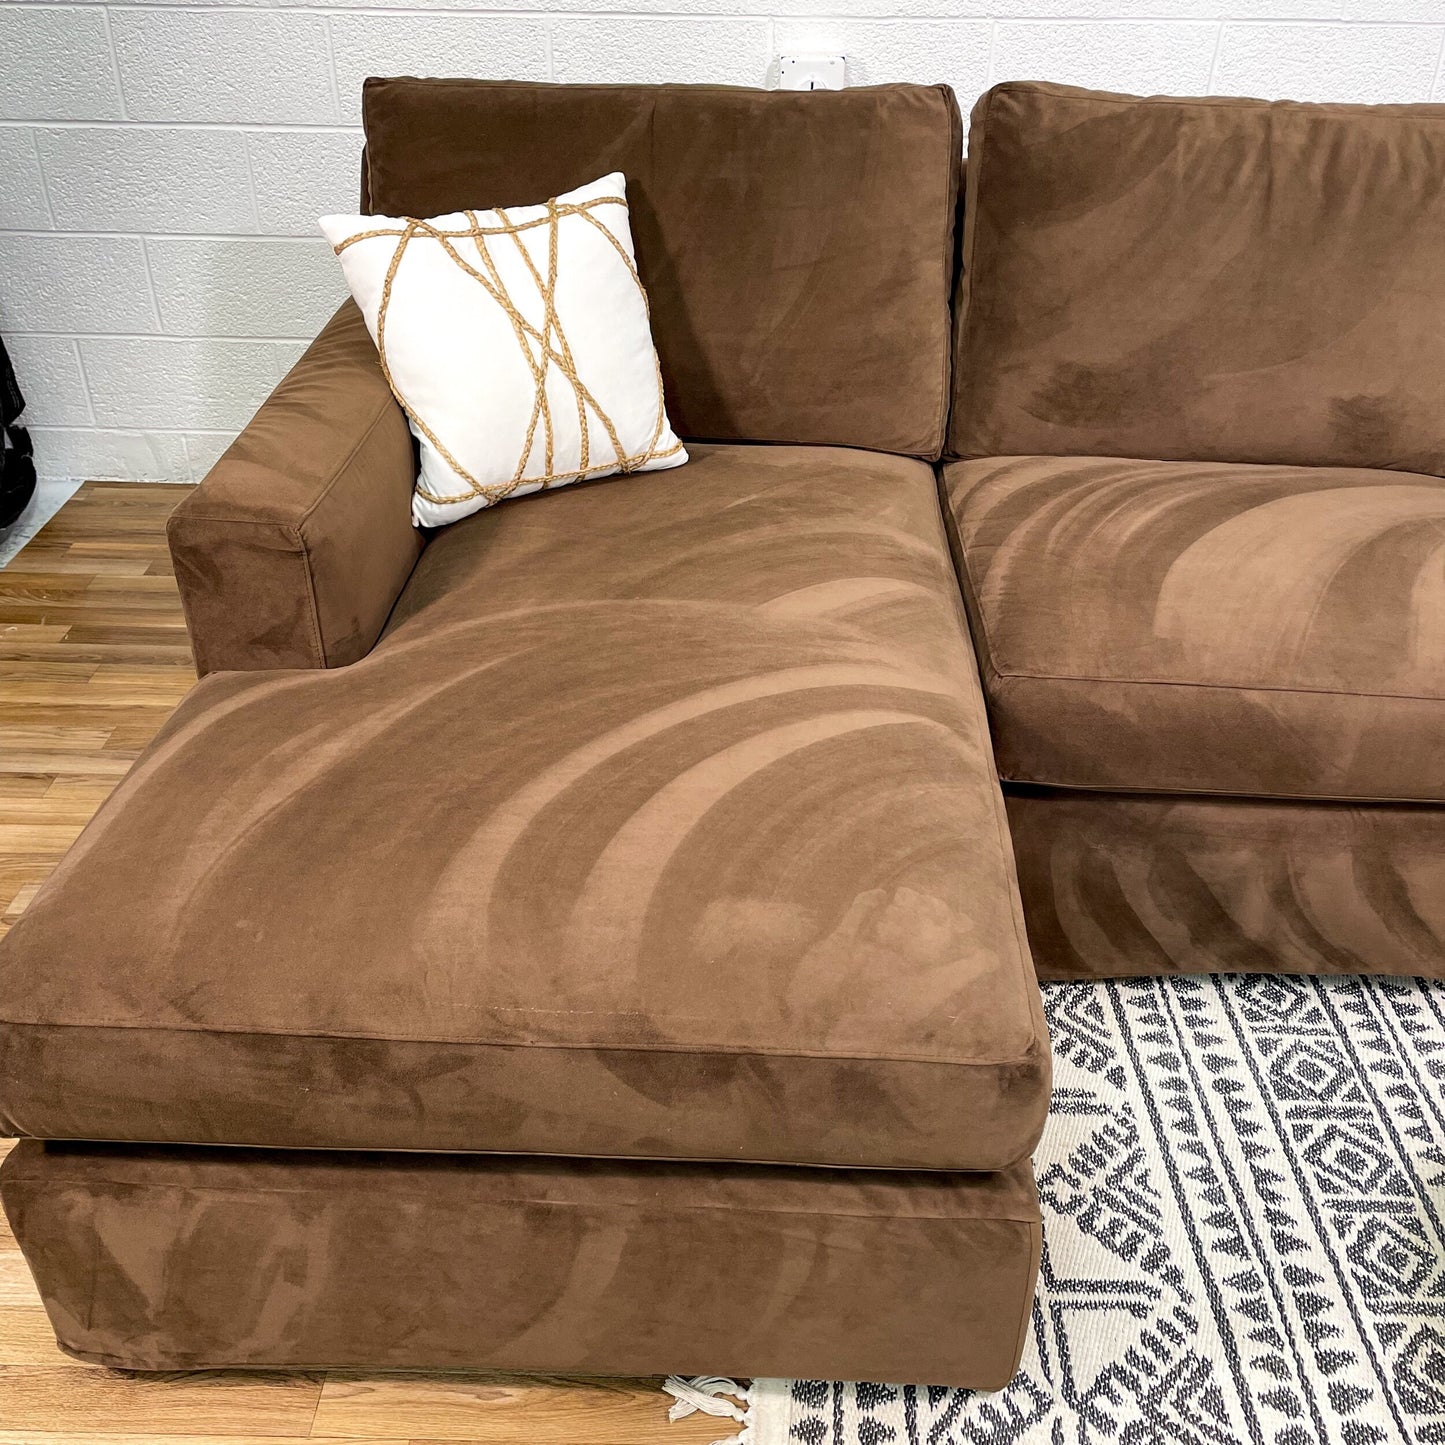 Crate & Barrel 3 pieceSlip Cover Sectional w/ Left and Right Chaise